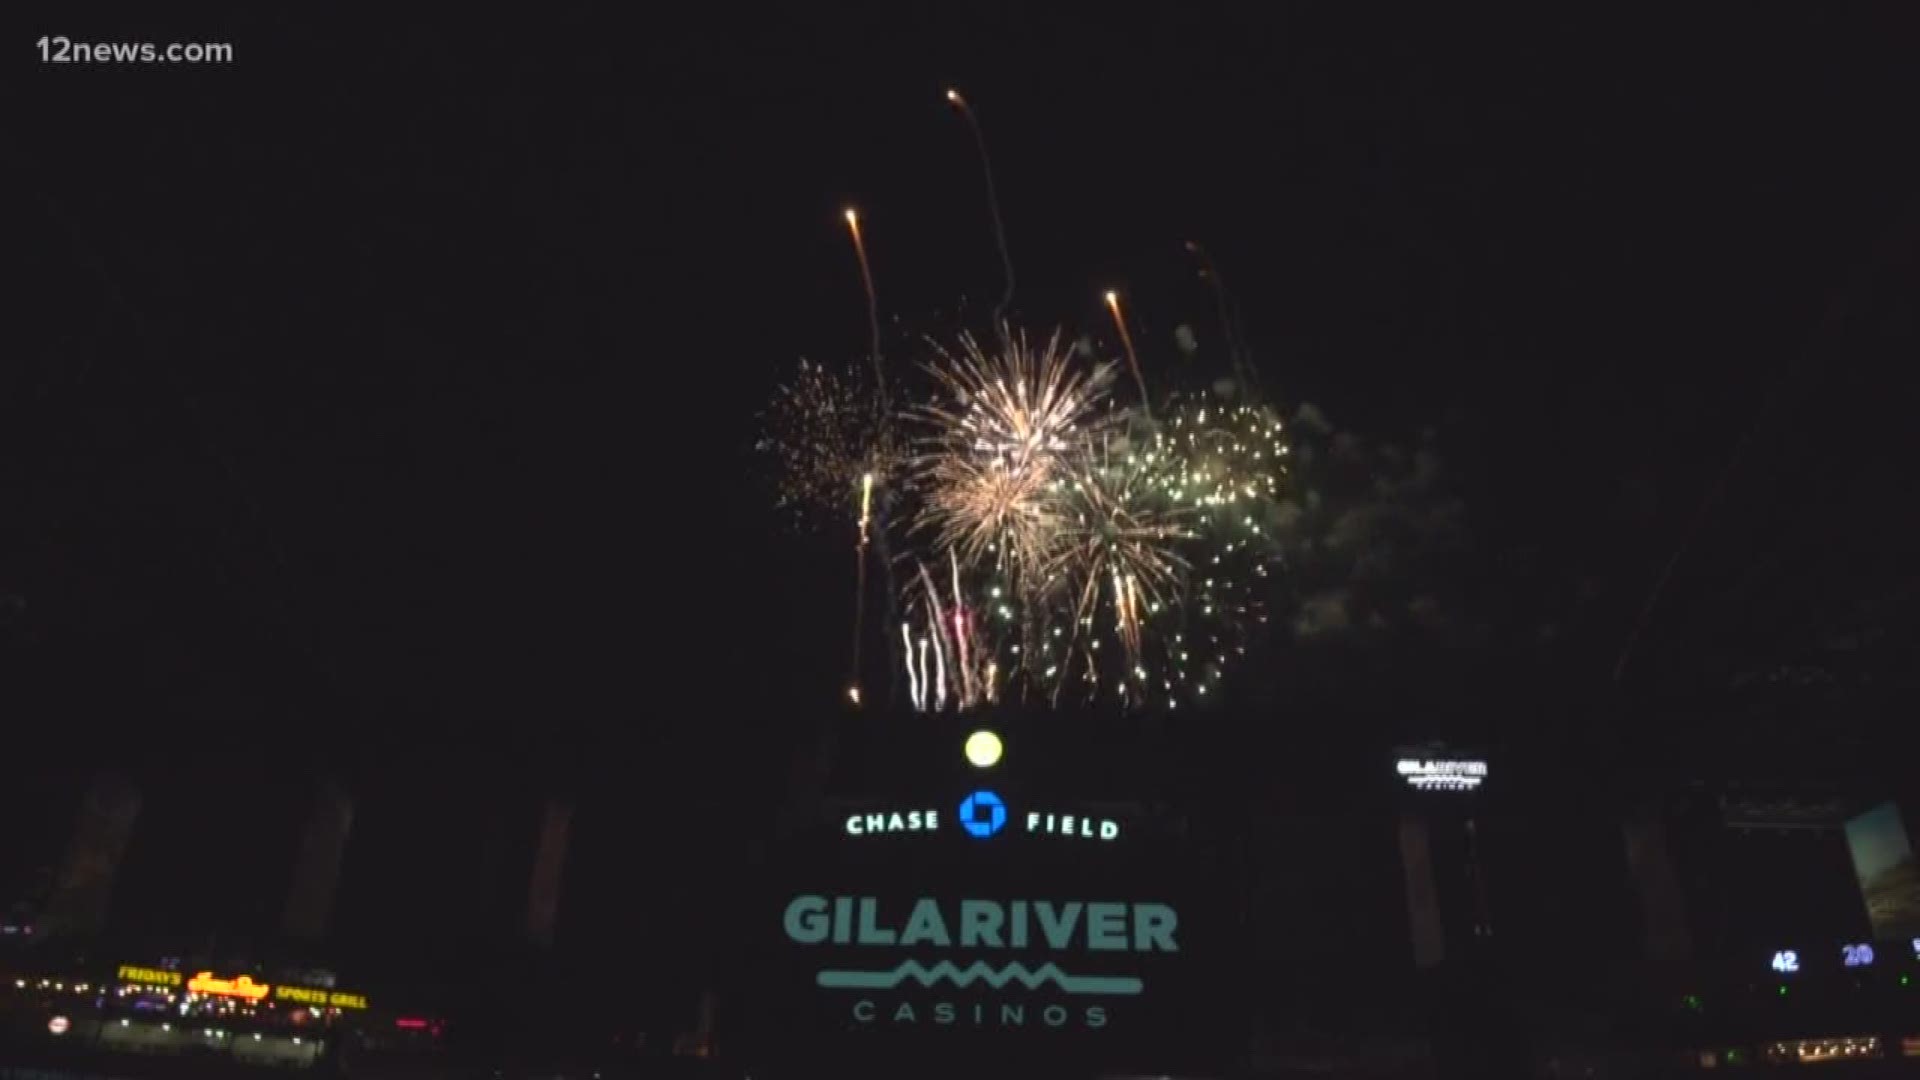 We take a look at what the Diamondbacks are doing to celebrate the Fourth of July holiday.